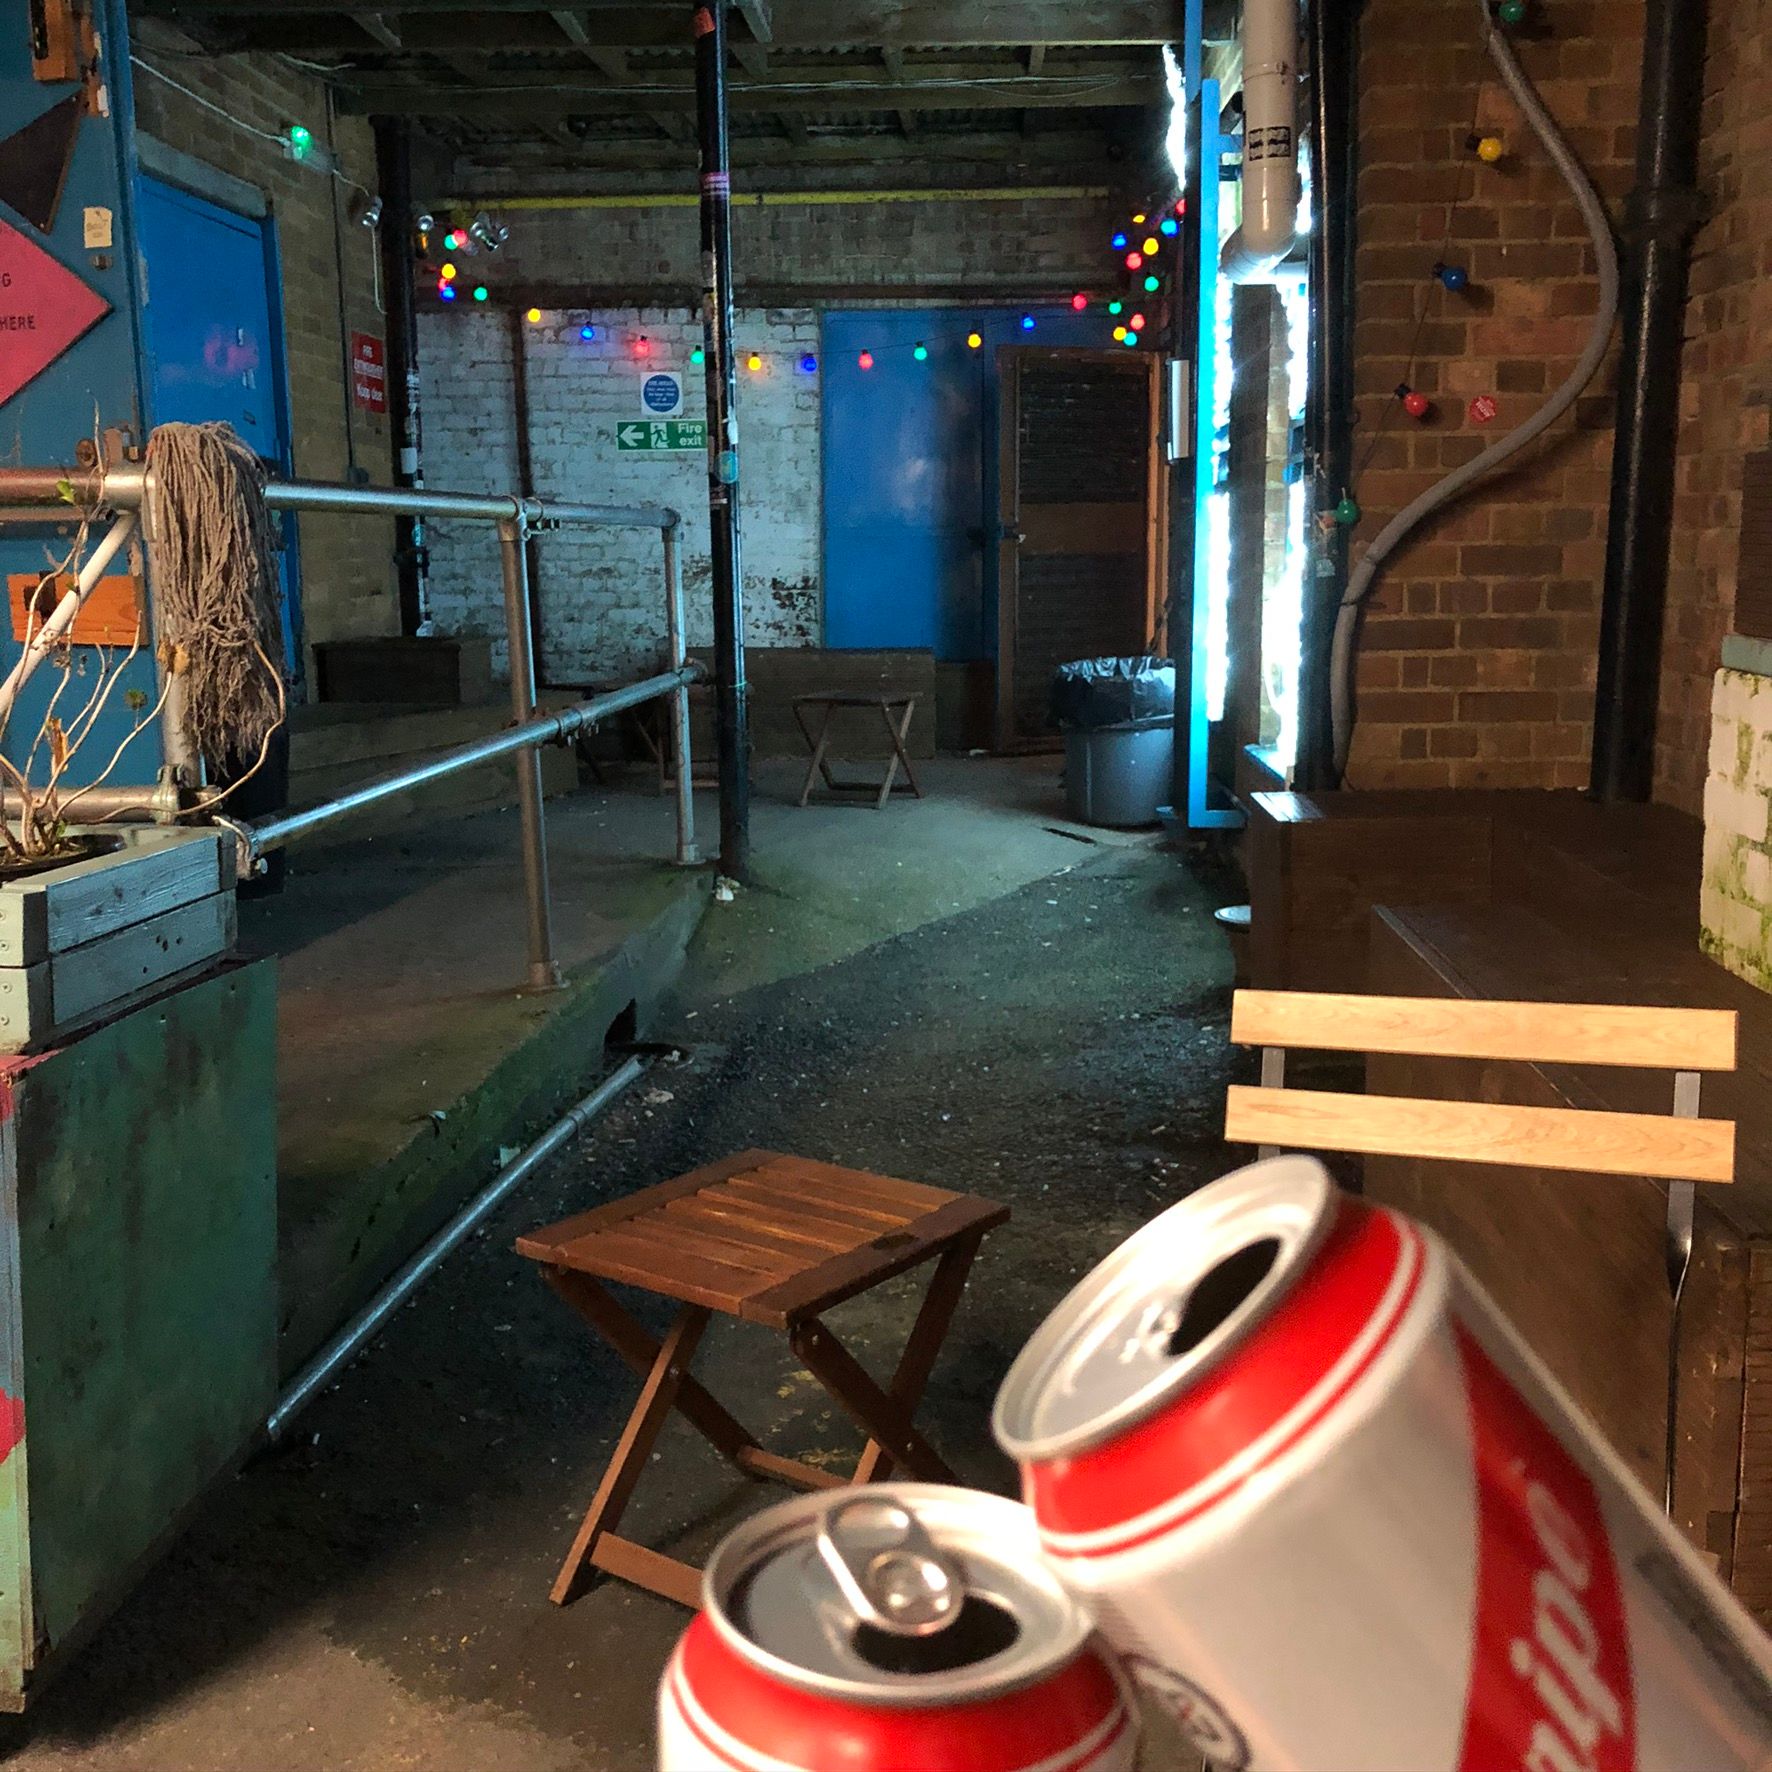 Two cans of Red Stripe in the foreground, a yard in the background decorated with fairy lights and a mop.